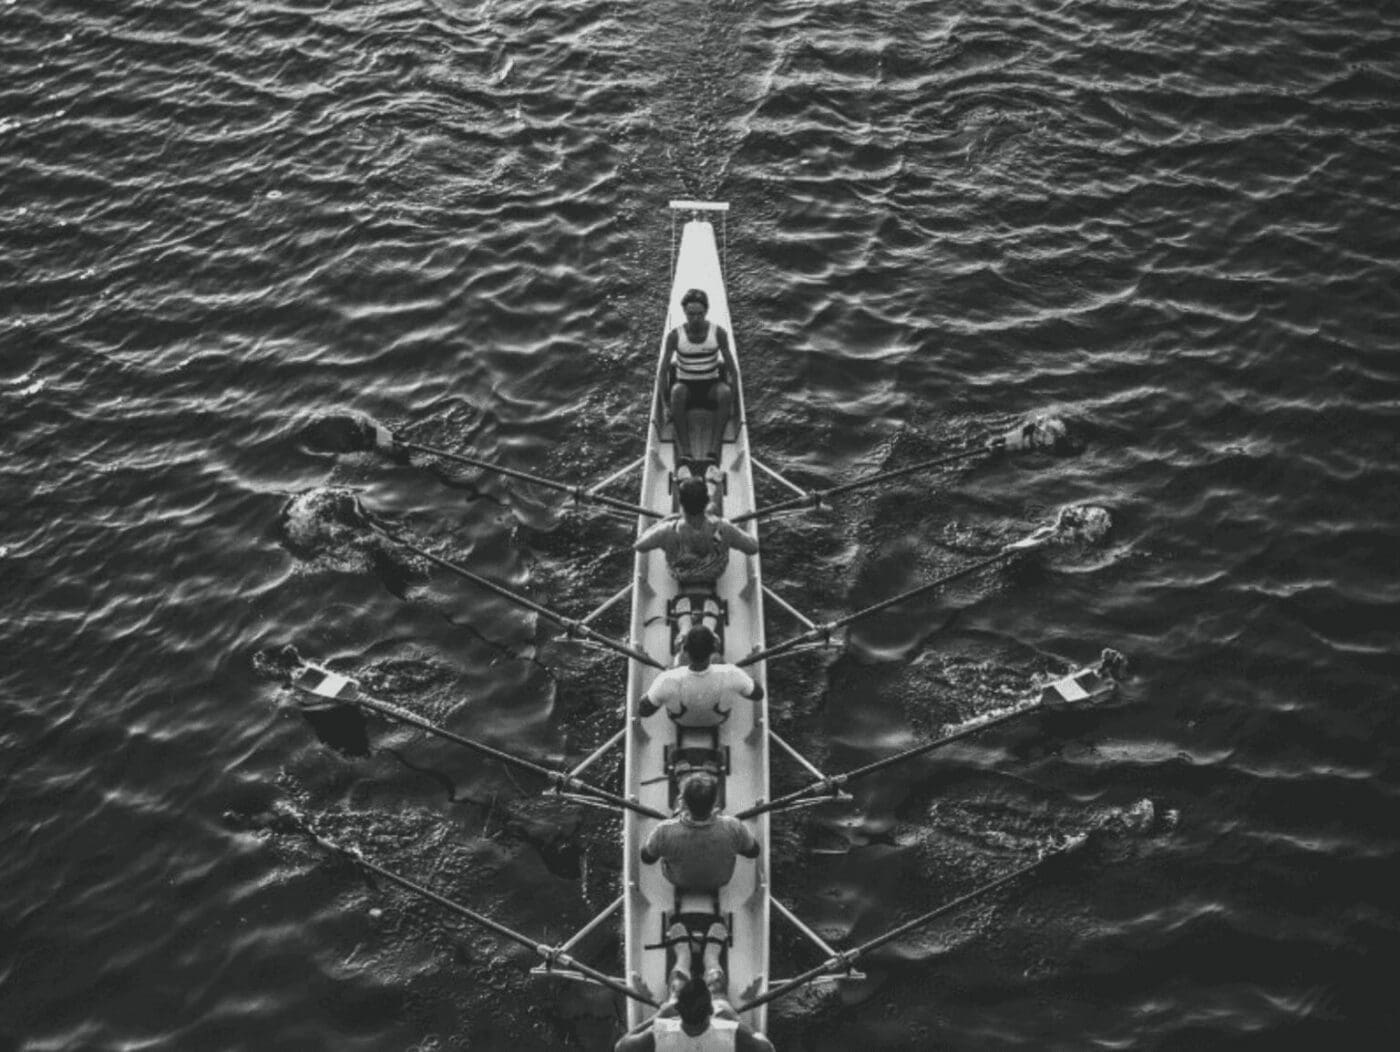 4 steps that lead to relational leadership - a team rowing in a boat, with the leader sitting in the front.